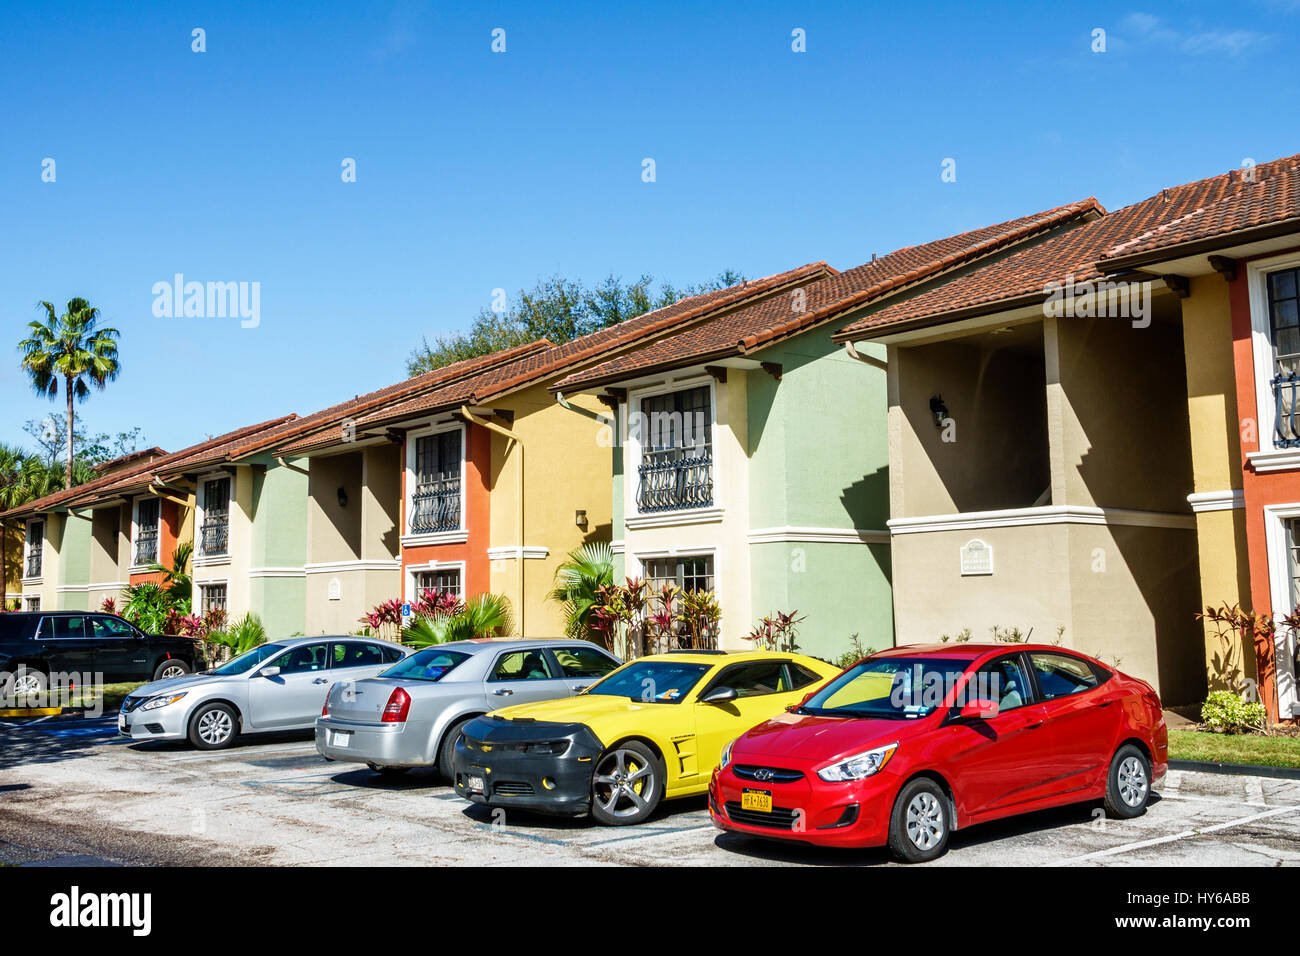 Florida Kissimmee,Legacy Vacation Club Kissimmee,resort,hotel,timeshare program,townhouse,cars,parking,FL170222072 Stock Photo